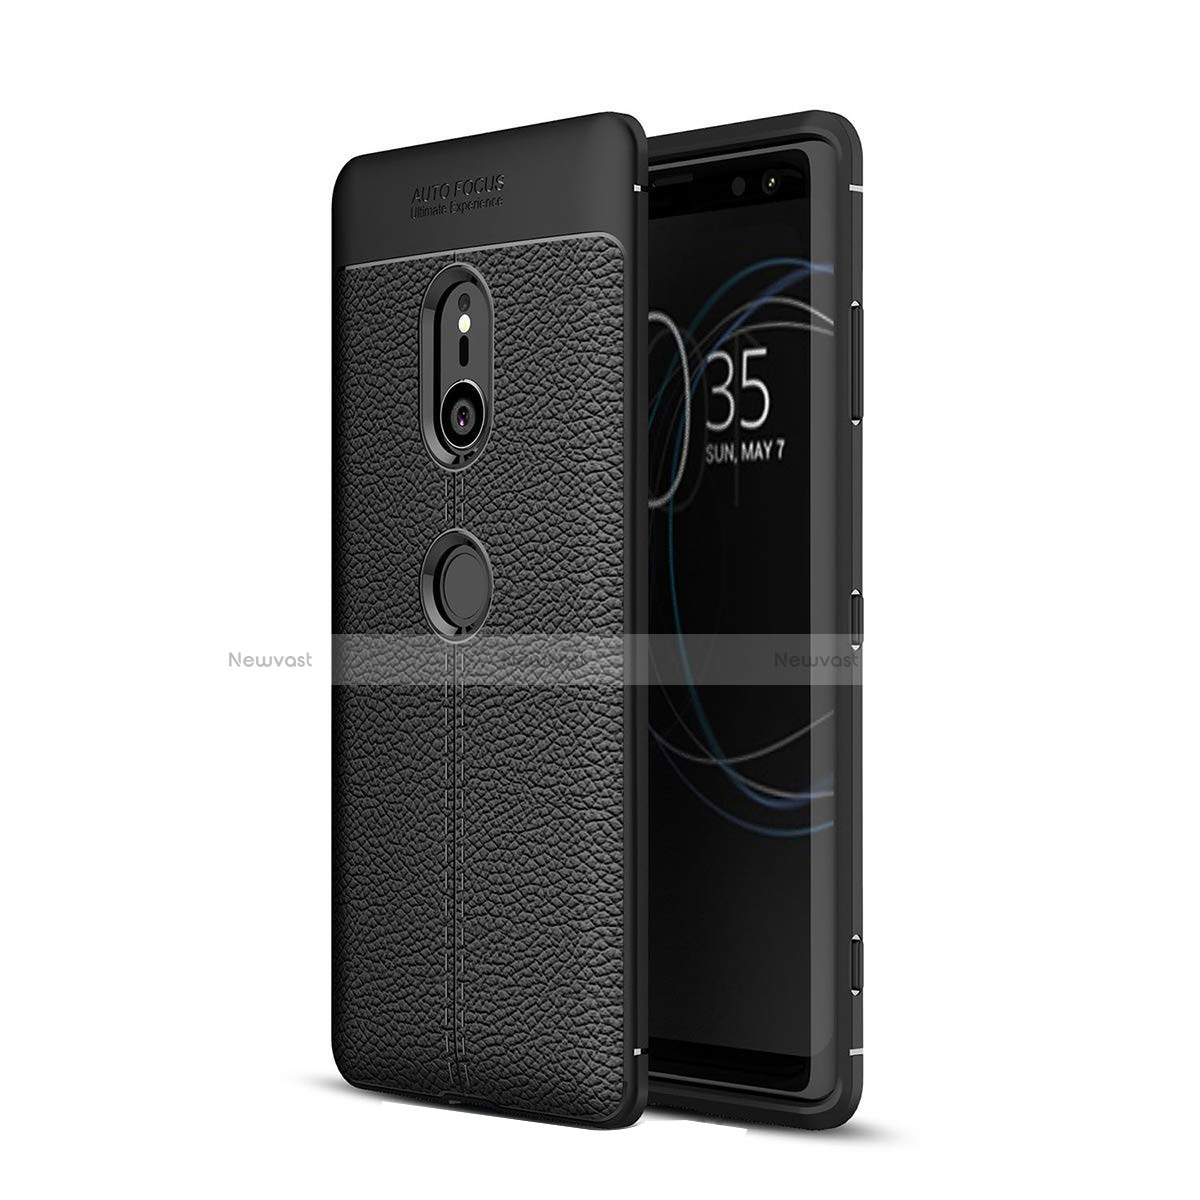 Soft Silicone Gel Leather Snap On Case Cover for Sony Xperia XZ3 Black